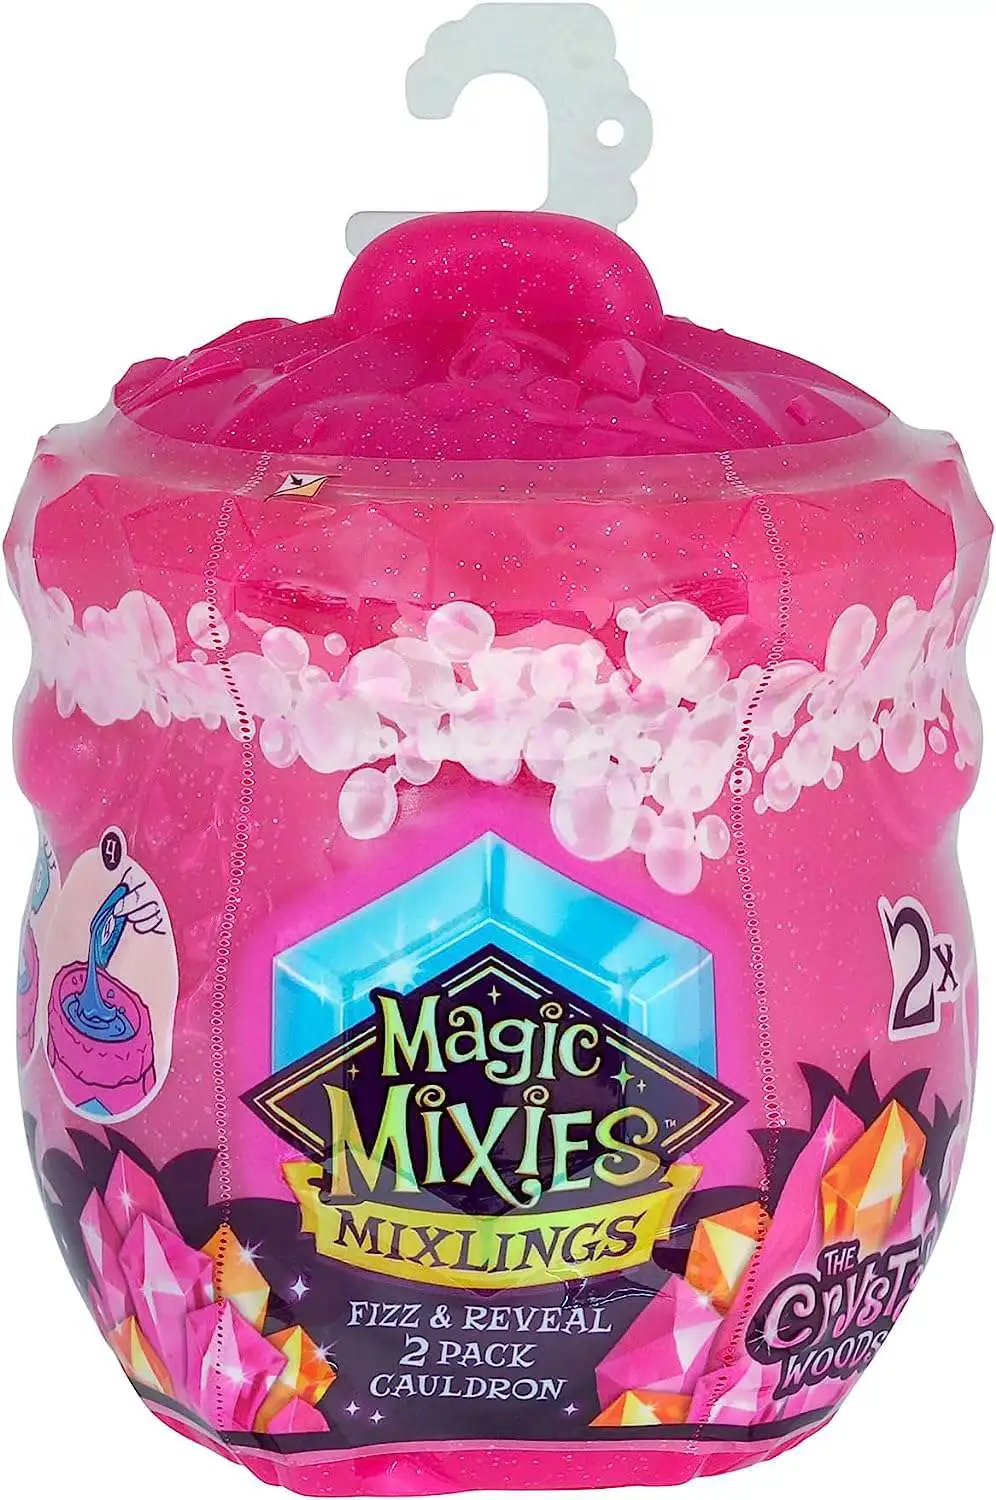  Magic Mixies Magical Gem Surprise 2 Pack Exclusive Limited Gift  Toy : Toys & Games